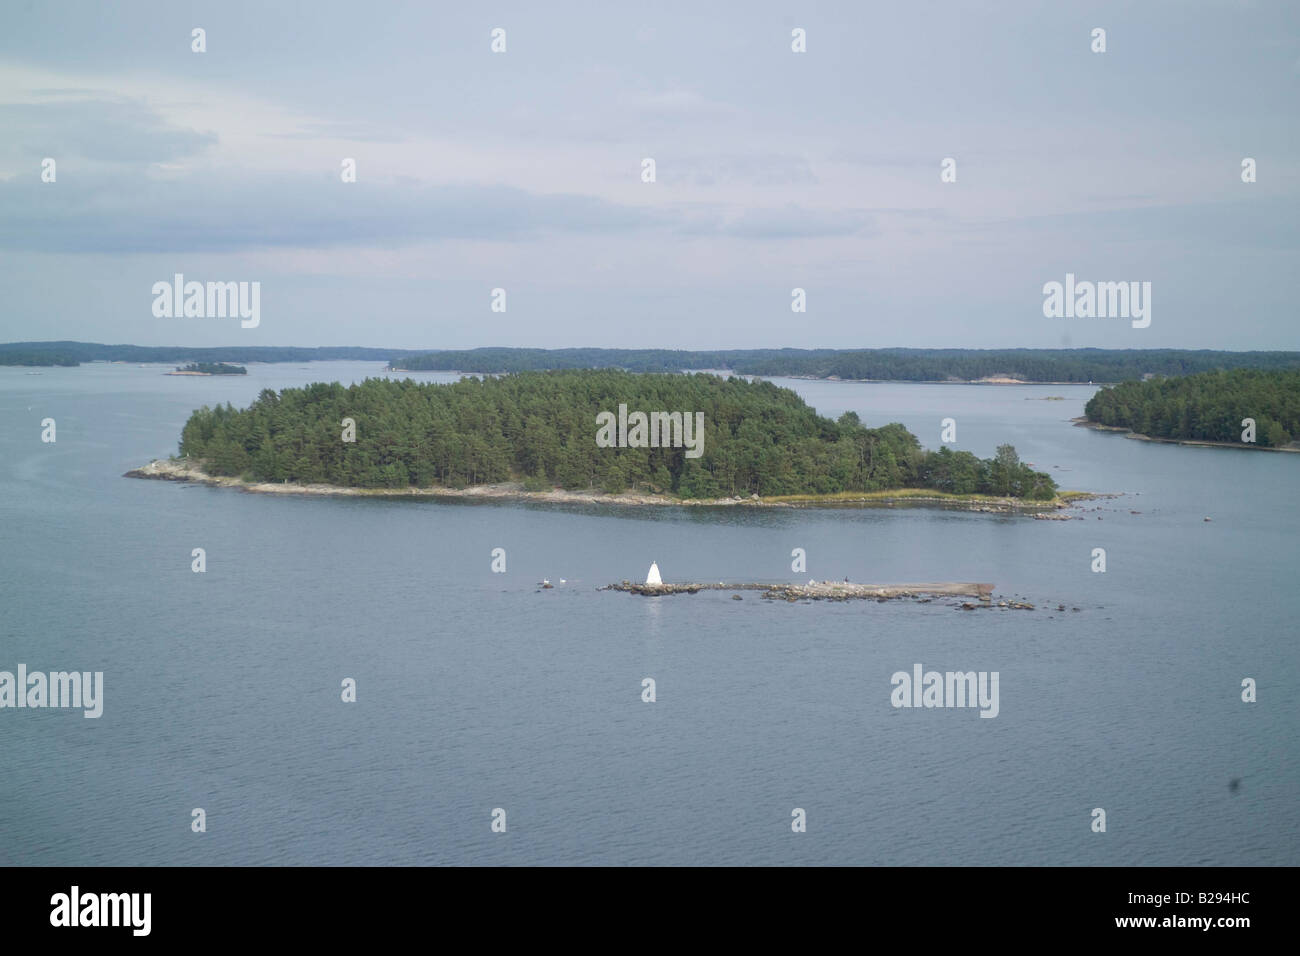 Aland Islands Finland Date 28 05 2008 Ref ZB693 114318 0016 COMPULSORY CREDIT World Pictures Photoshot Stock Photo